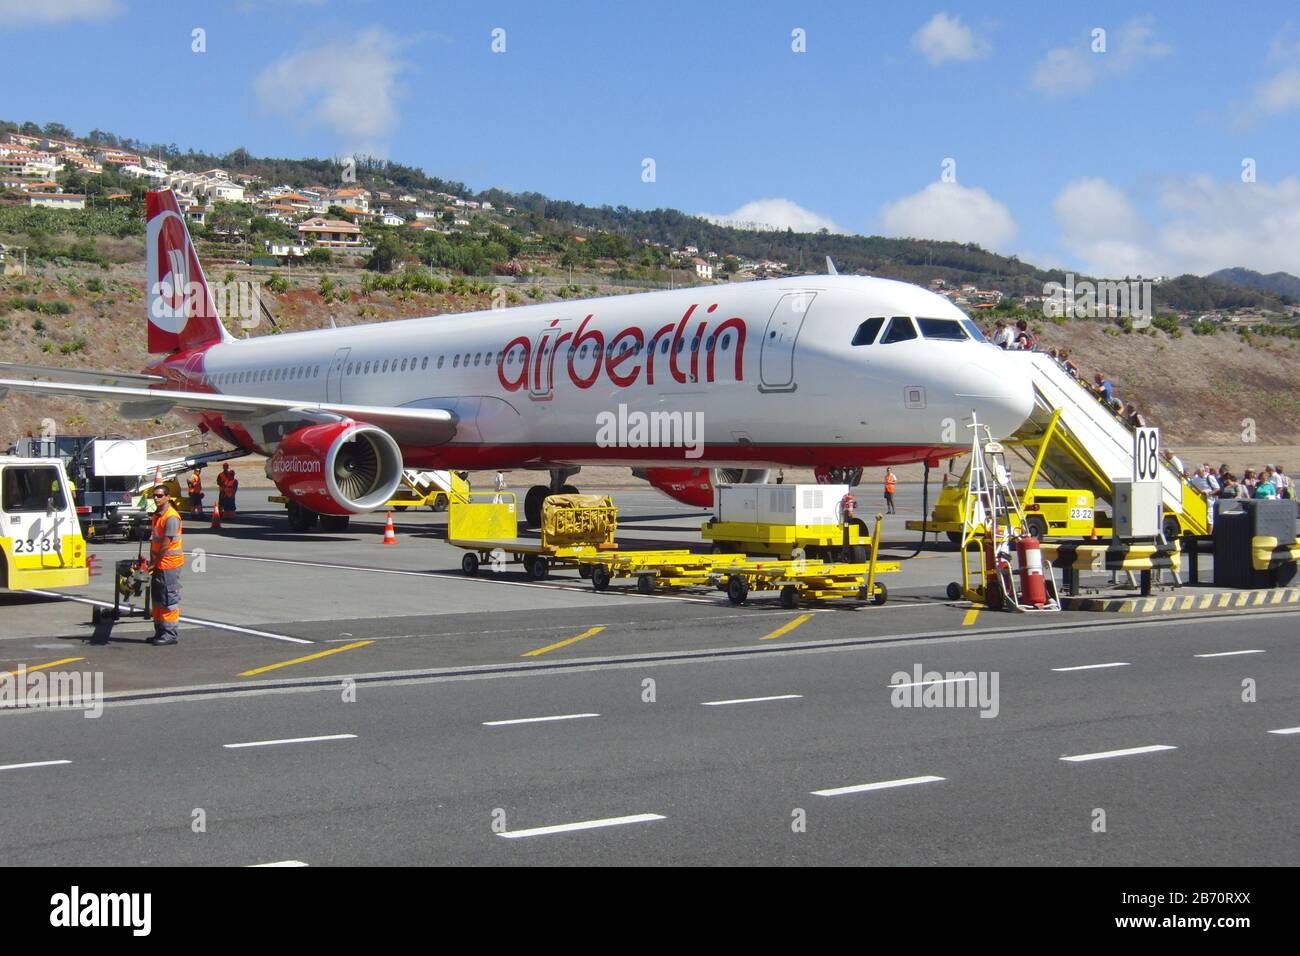 Funchal, Madeira, Portugal - 08-30-2012 airberlin, Air Berlin bording plane in funchal Stock Photo